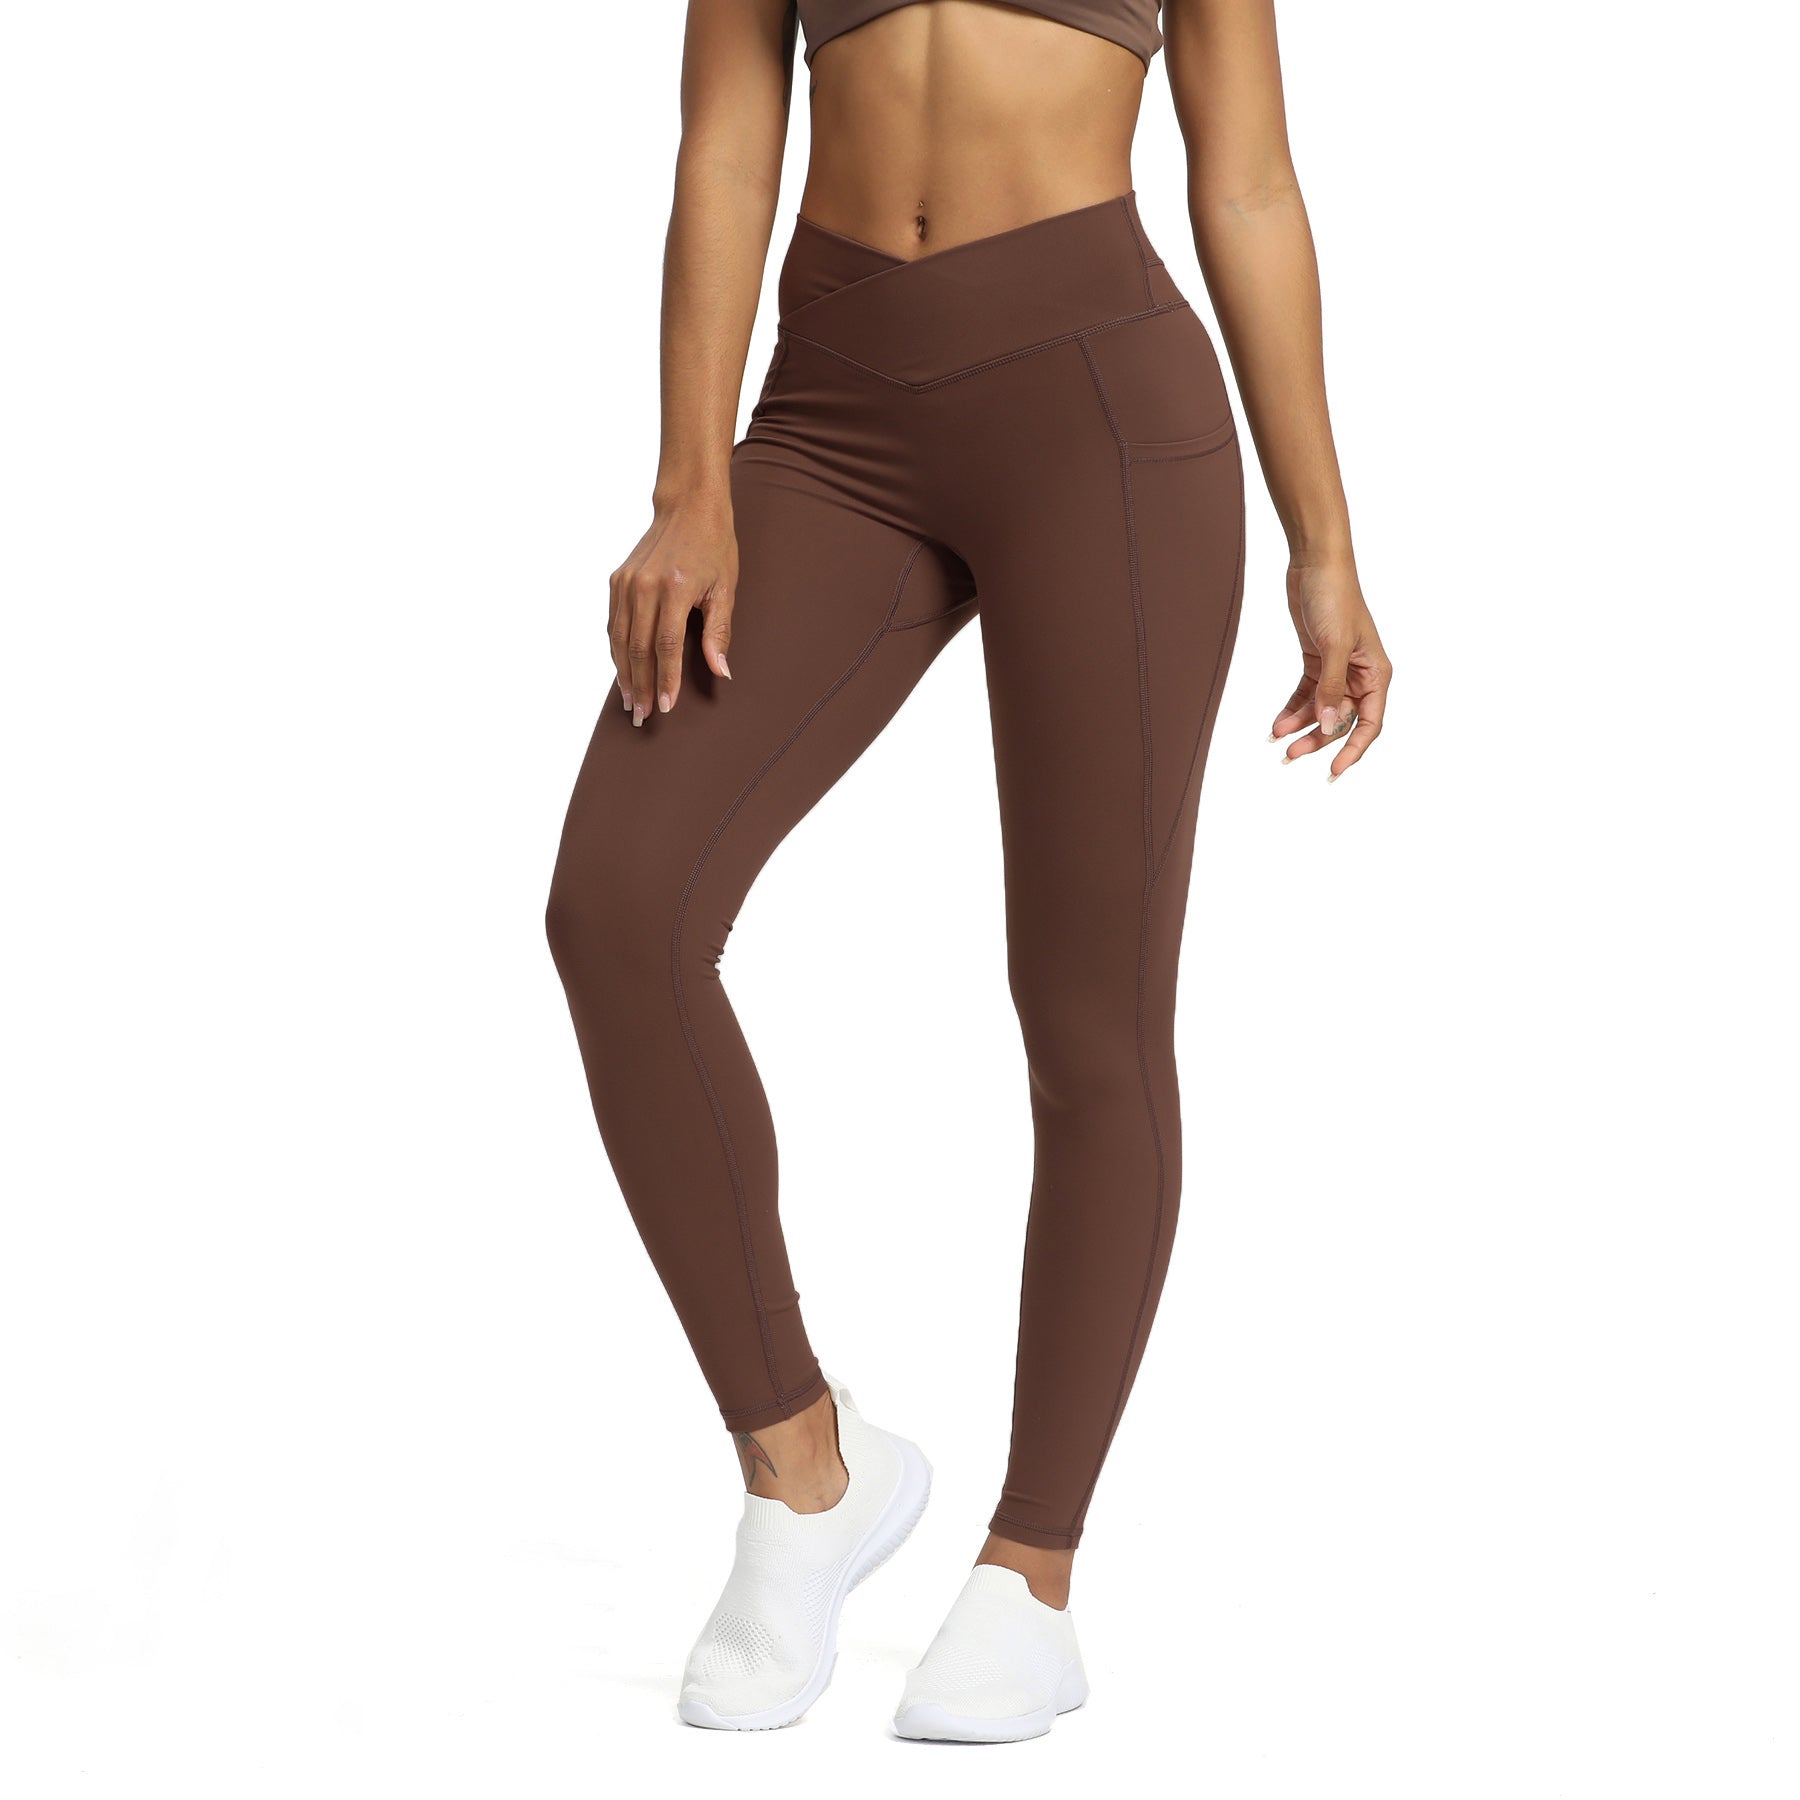 Buy Aoxjox Trinity High Waisted Yoga Pants with Pockets for Women Tummy  Control Cross-Waist Crossover Workout Leggings, A Black (Regular Waistband),  Medium at